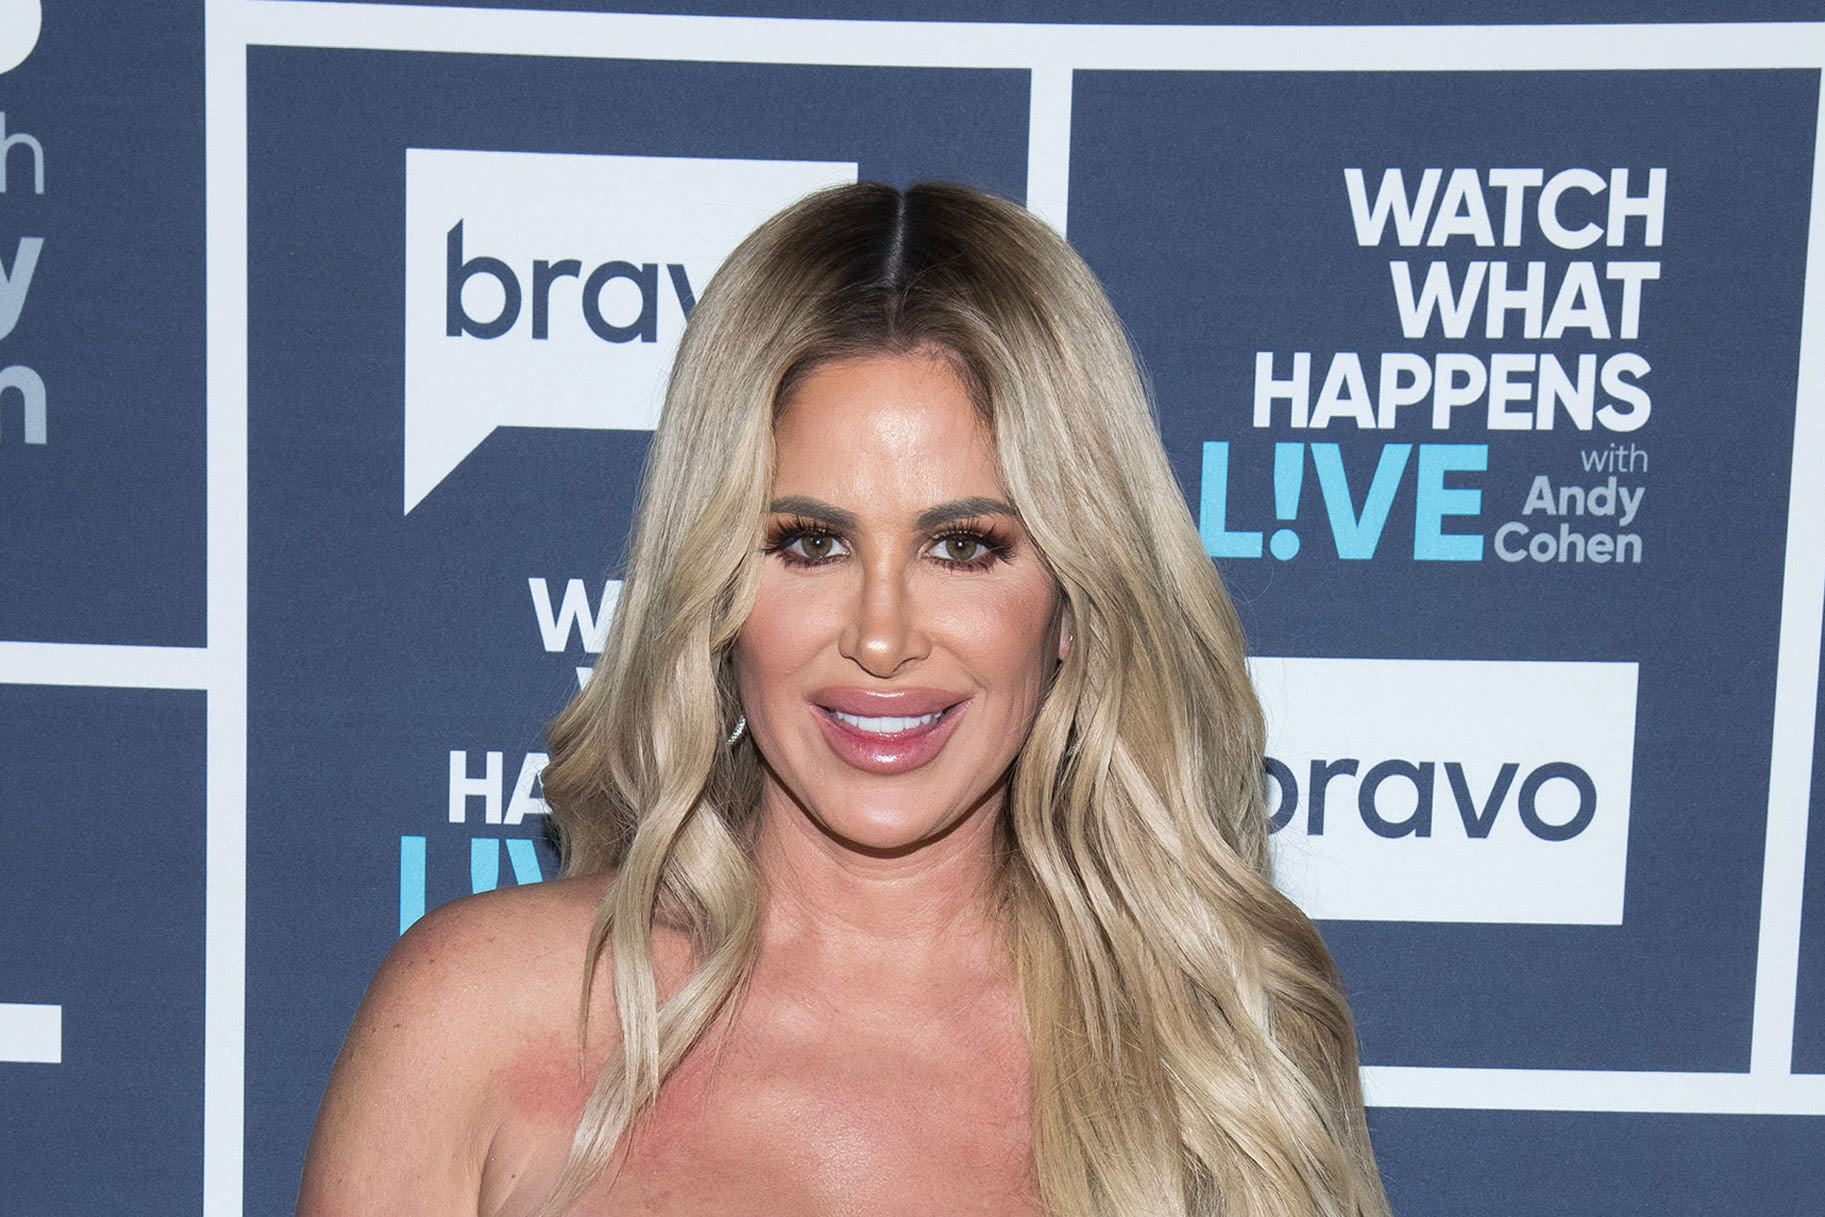 Kim Zolciak Debuts a Jaw-Dropping Brunette Hairstyle: "Midlife Crisis" (PHOTOS) | Bravo TV Official Site